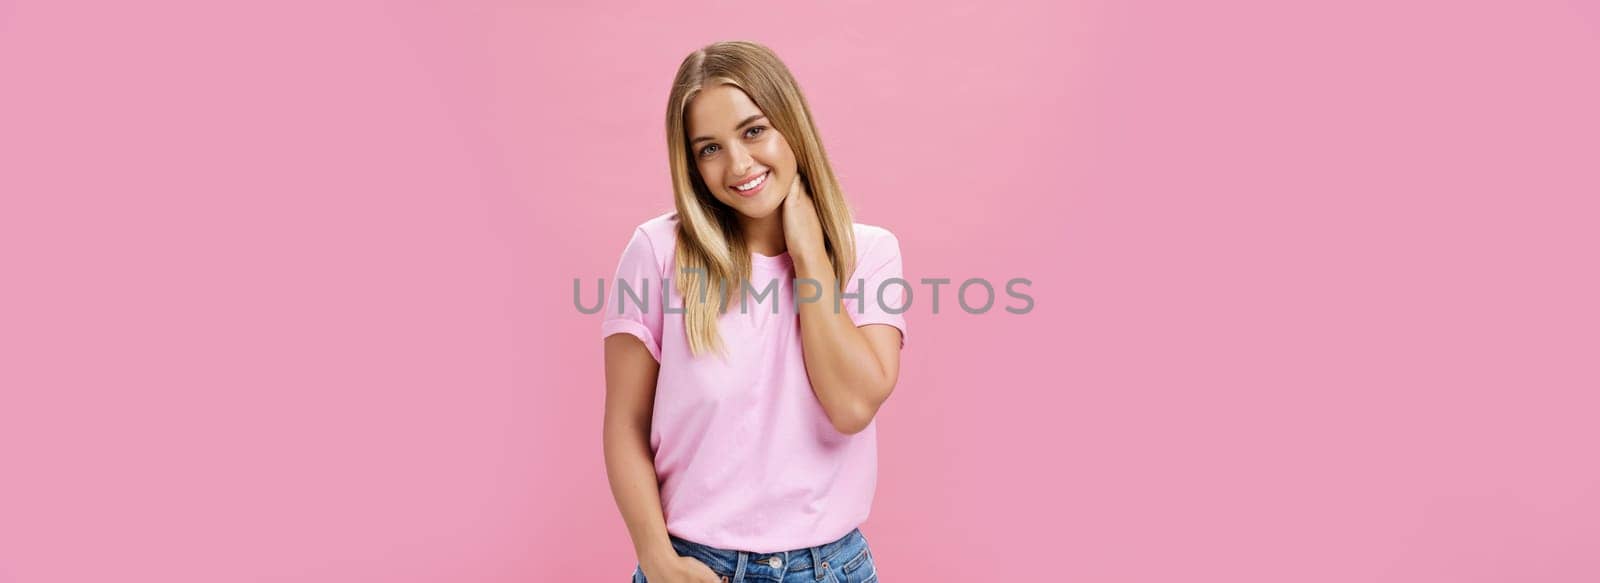 Portrait of shy and timid attractive european woman with fair hair in casual outfit touching neck silly tilting head and smiling cute at camera standing over pink background. Emotions concept